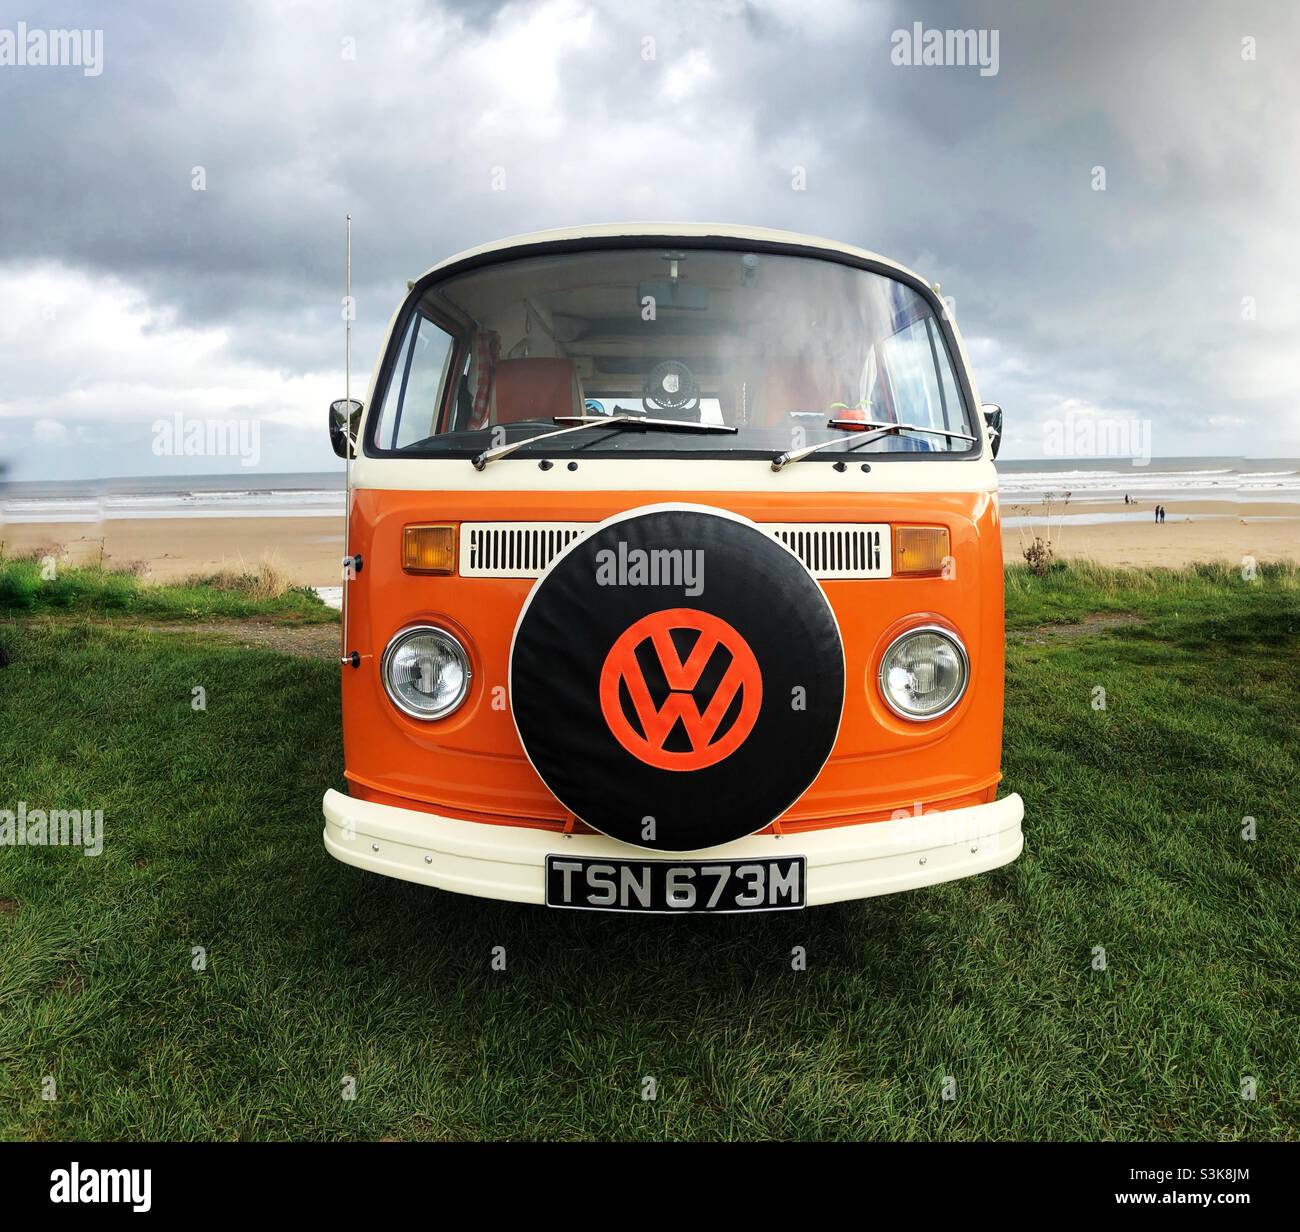 A classic VW bug campervan in orange colour with a retro feel by the beach and ocean Stock Photo